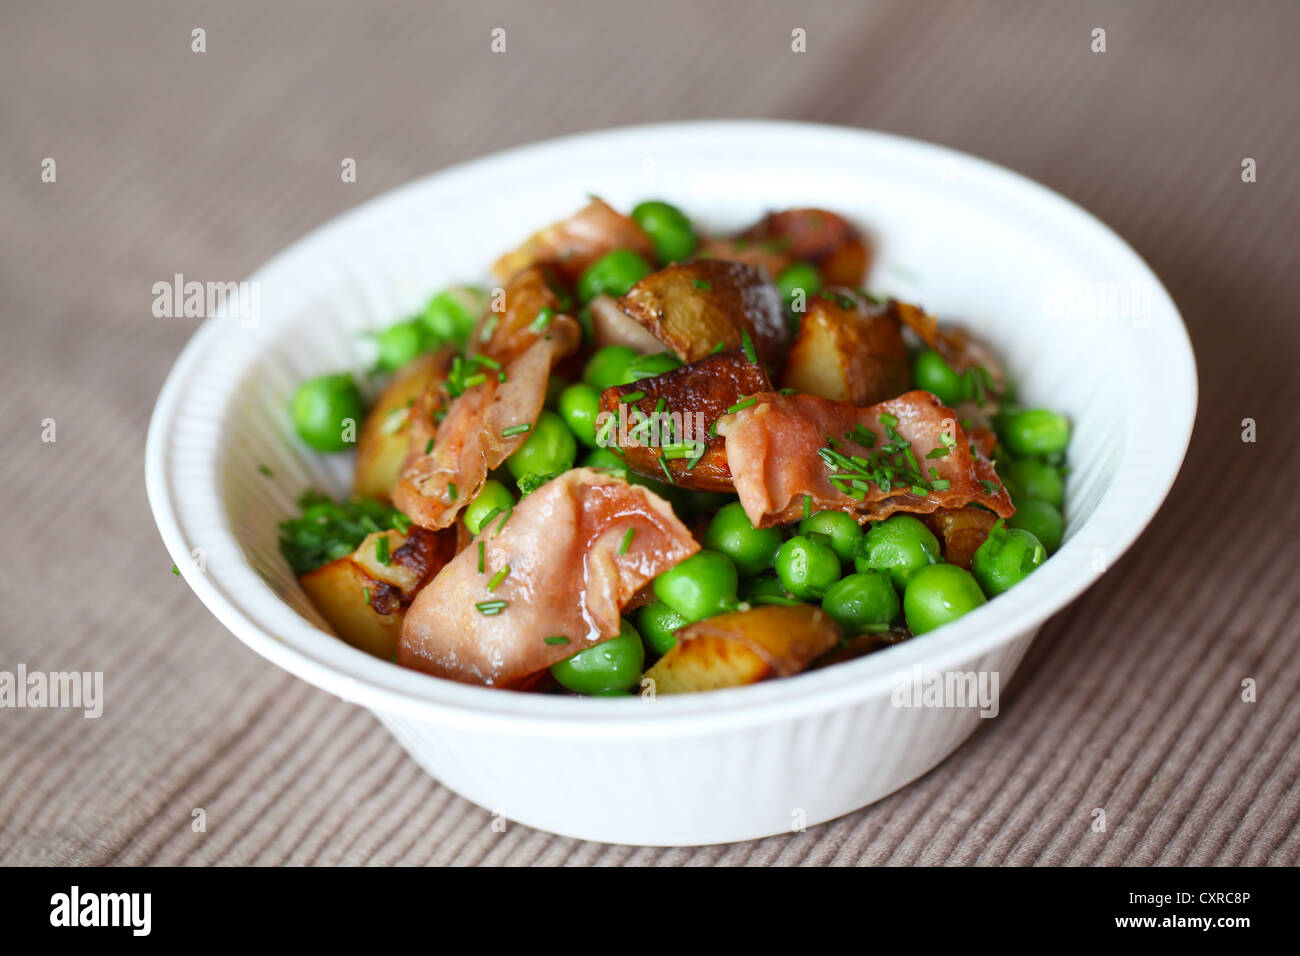 Green pea, baked potato and ham salad with dill. Stock Photo